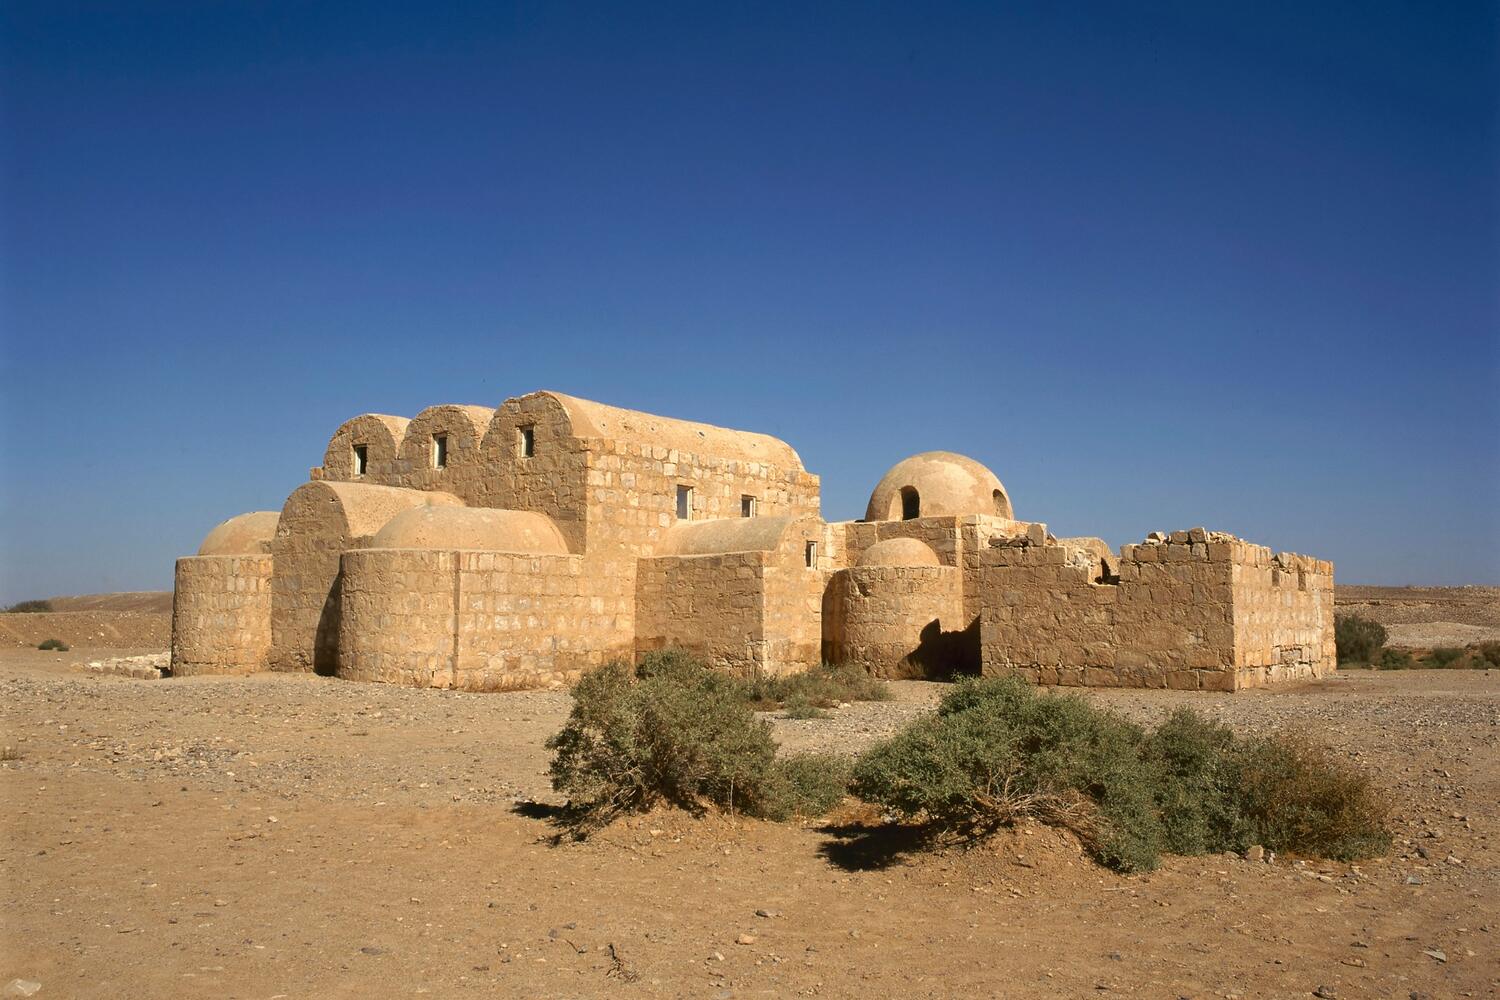 Ancient fortress ruins in a desert landscape.